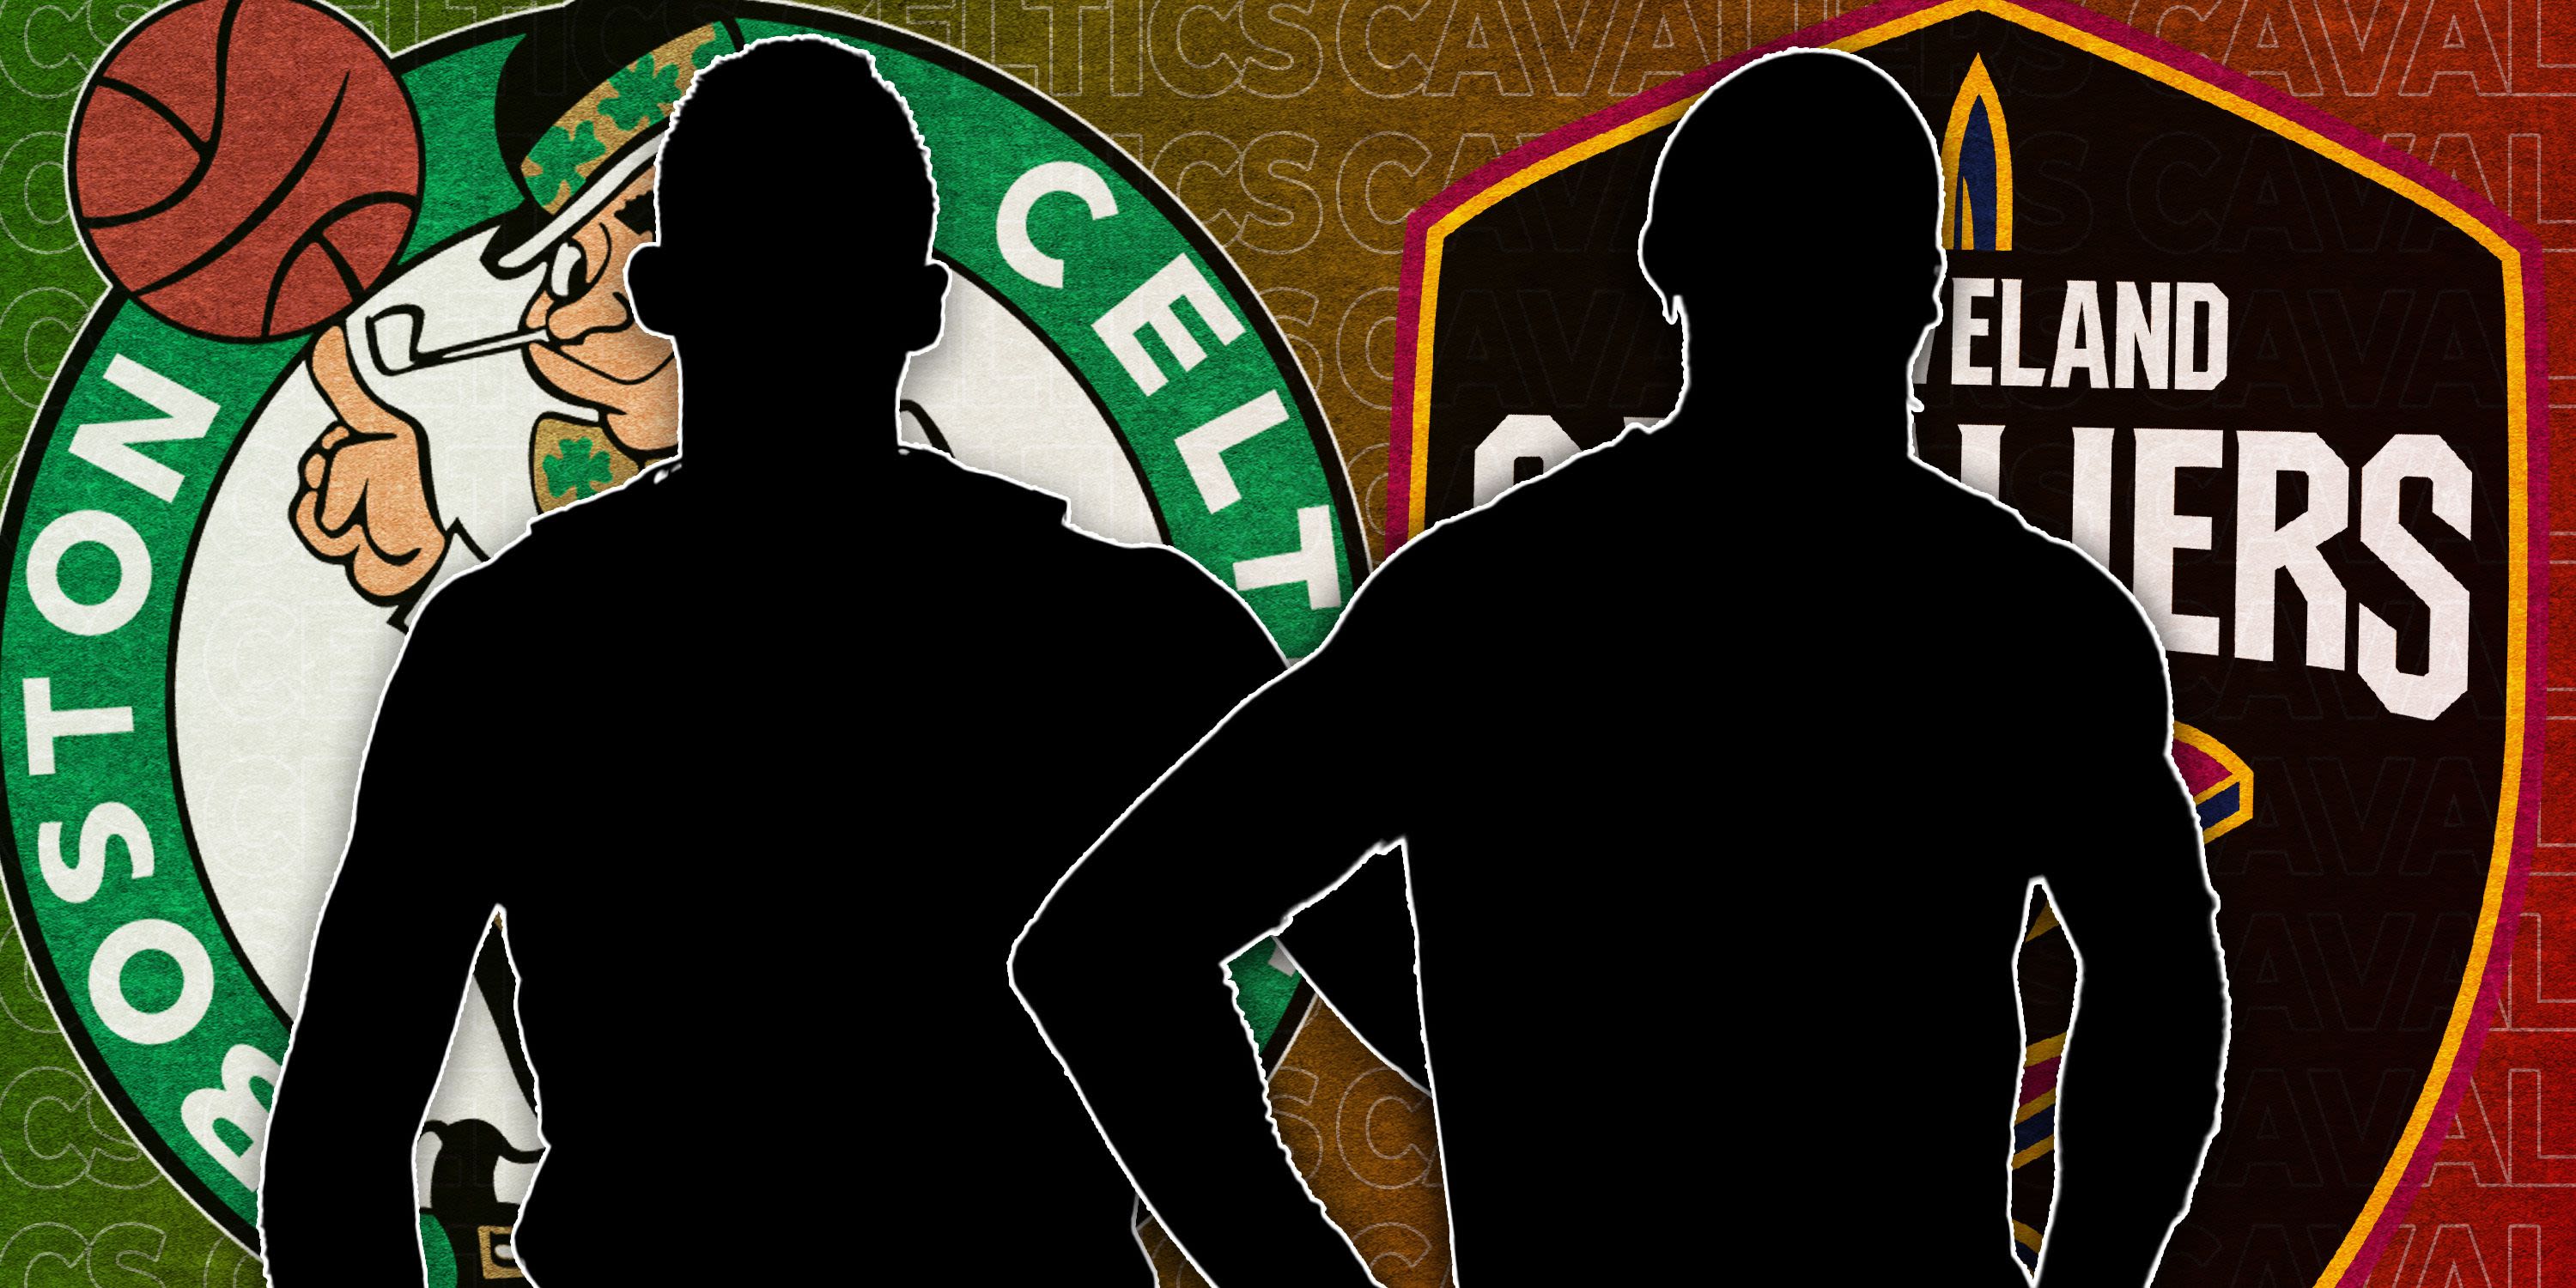 Two Unsung Heroes to Watch in Cavaliers-Celtics Series